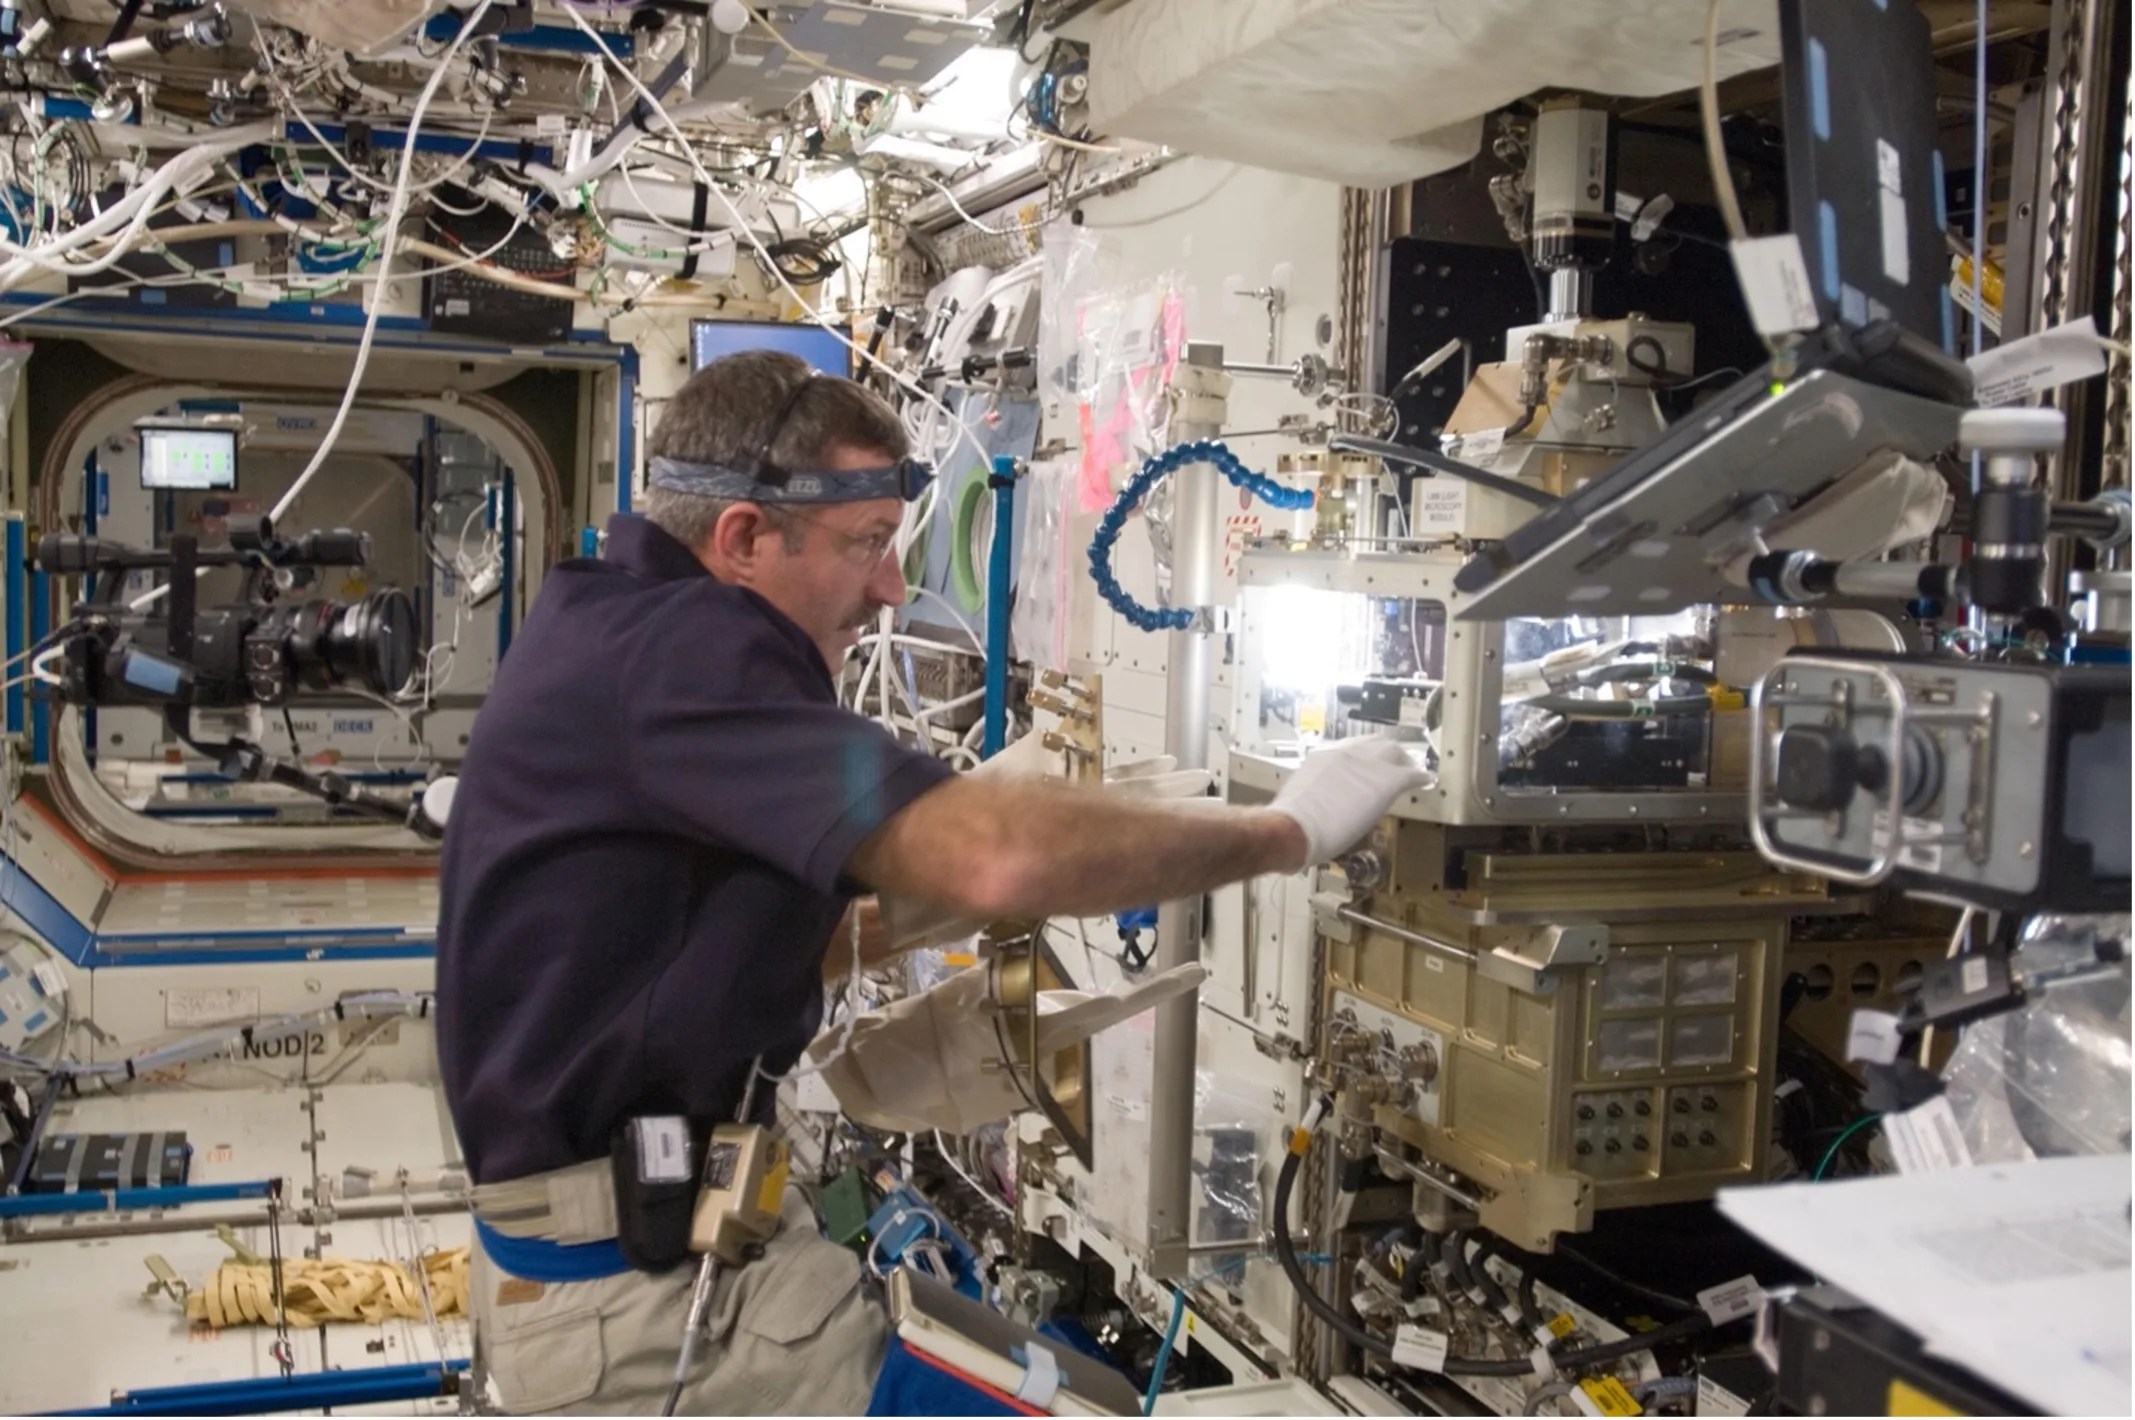 Astronaut aboard the International Space Station holding onto large, sqaure opening within a mechanical device.